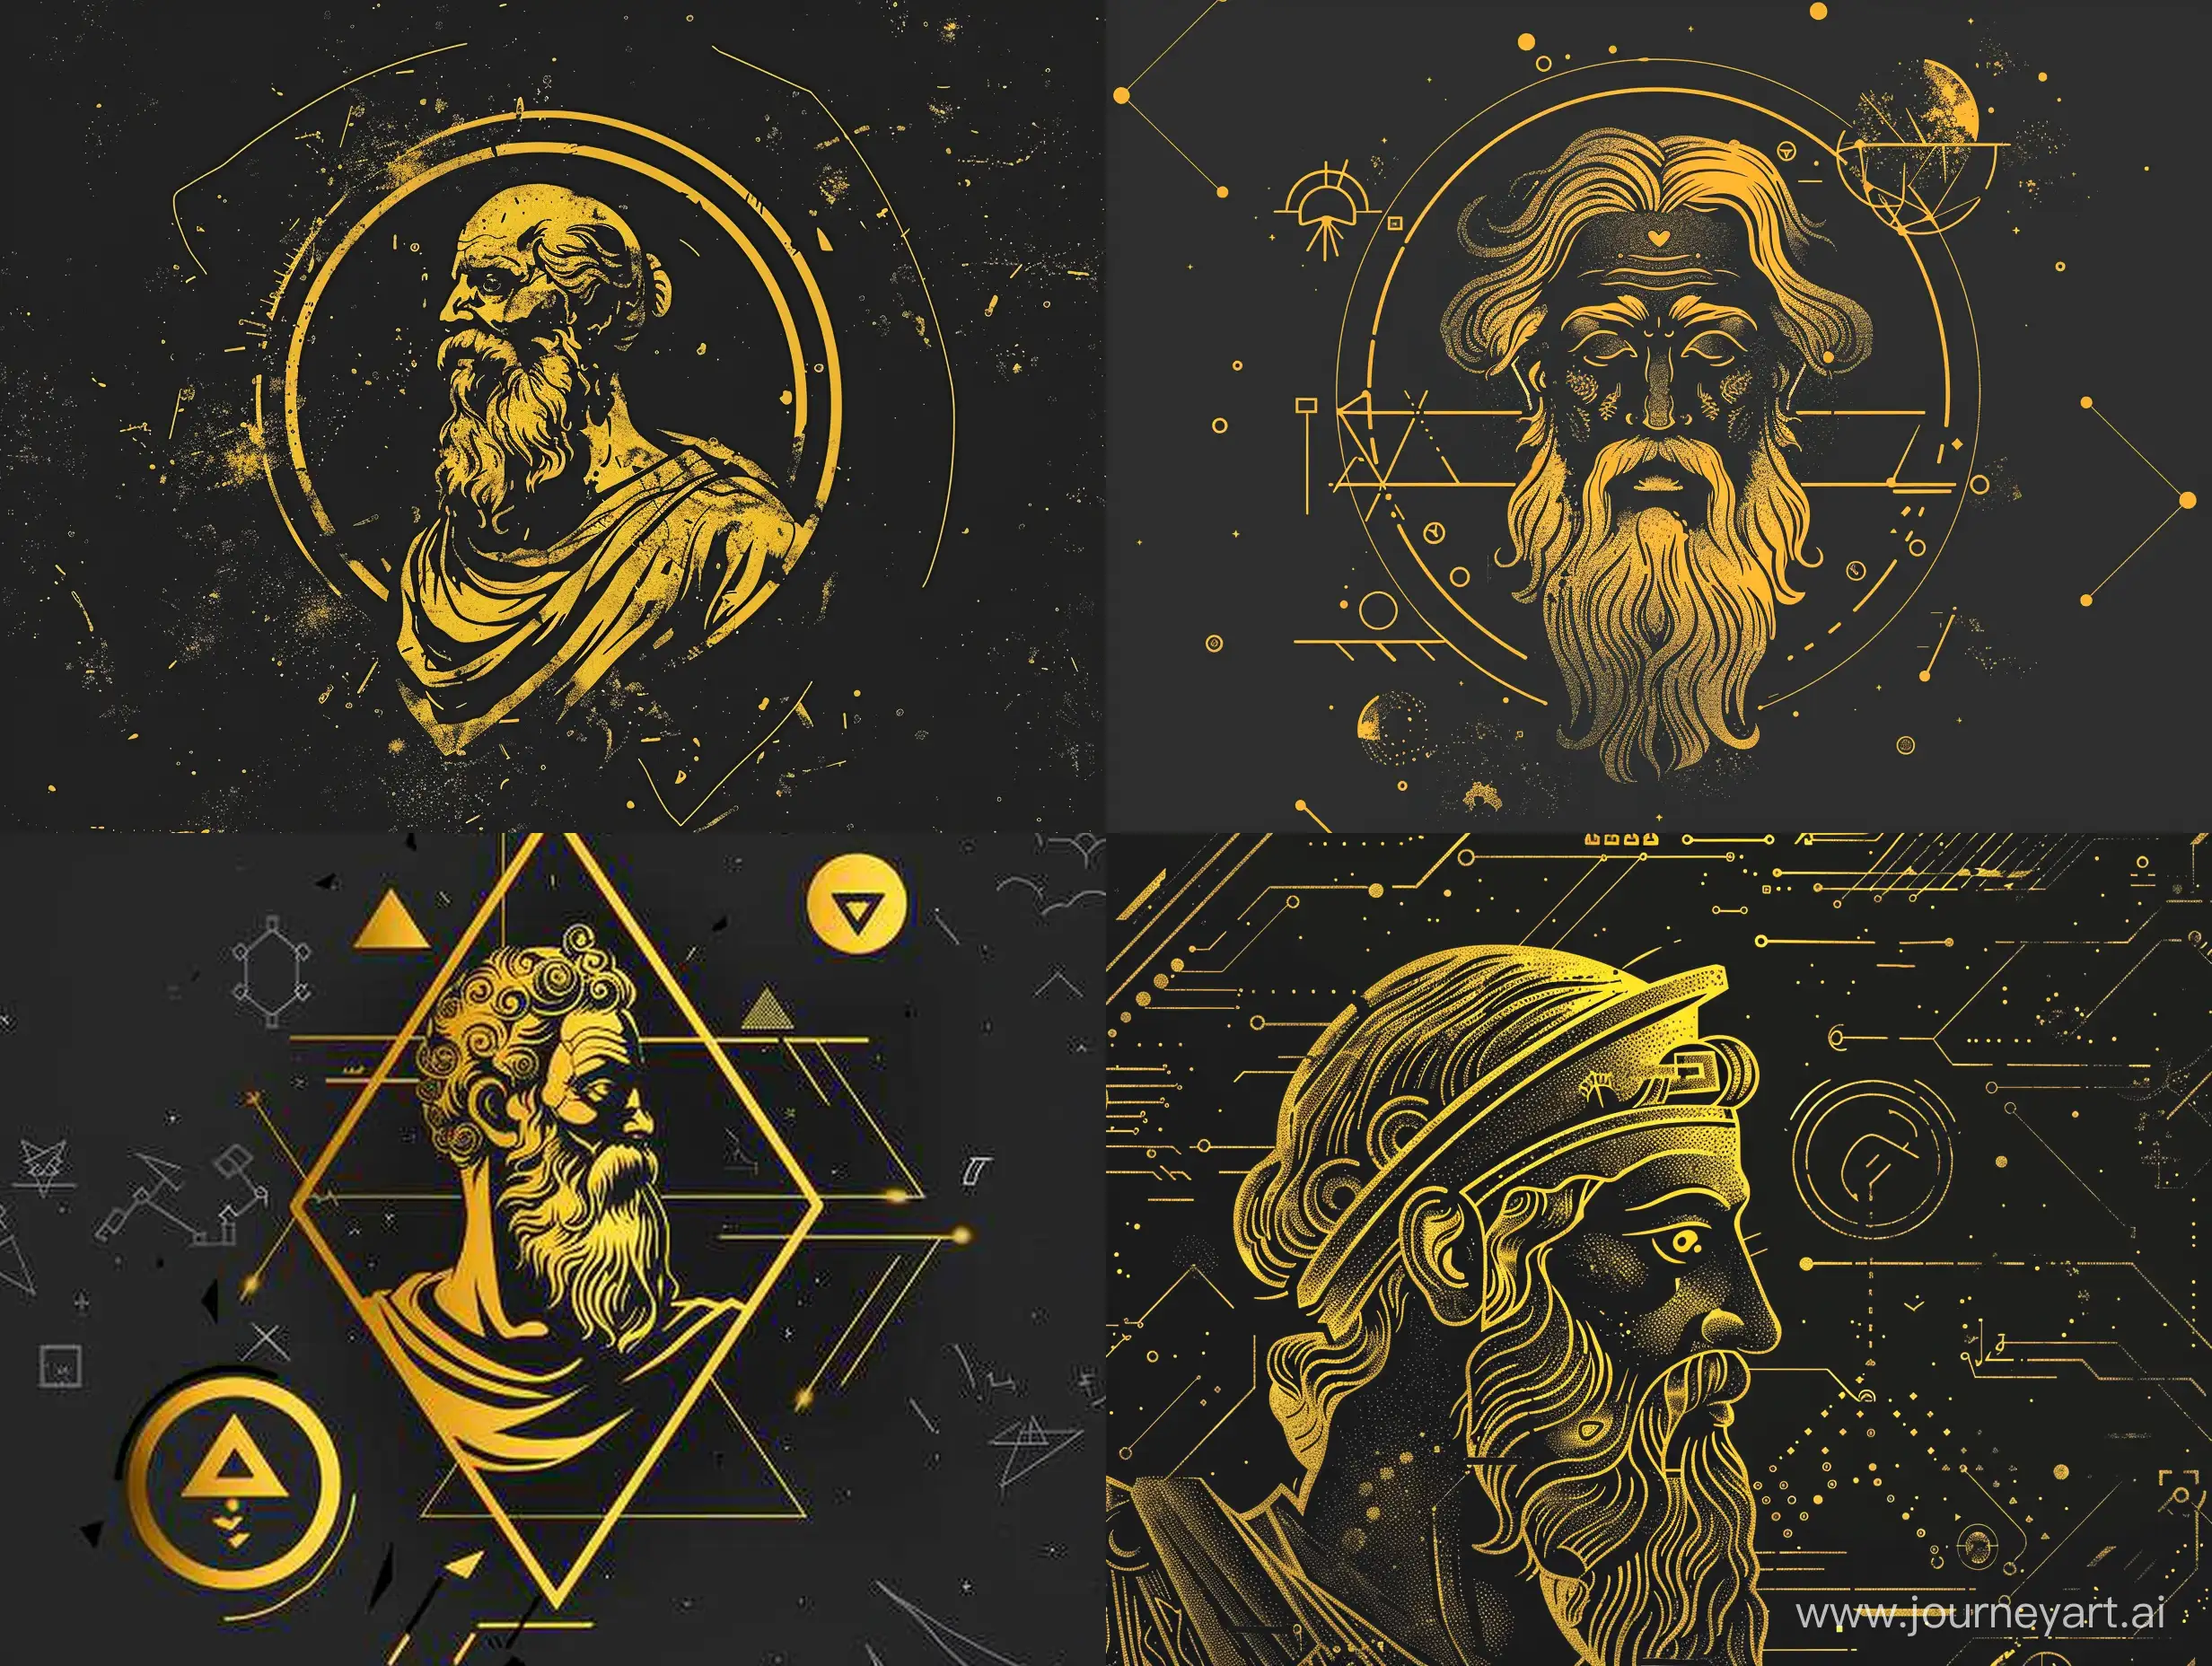 Create a rebellious atmosphere for the cover design by using a black background with a golden or yellow depiction of an ancient Greek philosopher like Heraclitus. Incorporate an impactful symbol or pattern instead of text. This symbol or pattern could be, for example, a depiction of Heraclitus or another ancient Greek philosopher. Ensure the overall look of the design resembles an Instagram post.